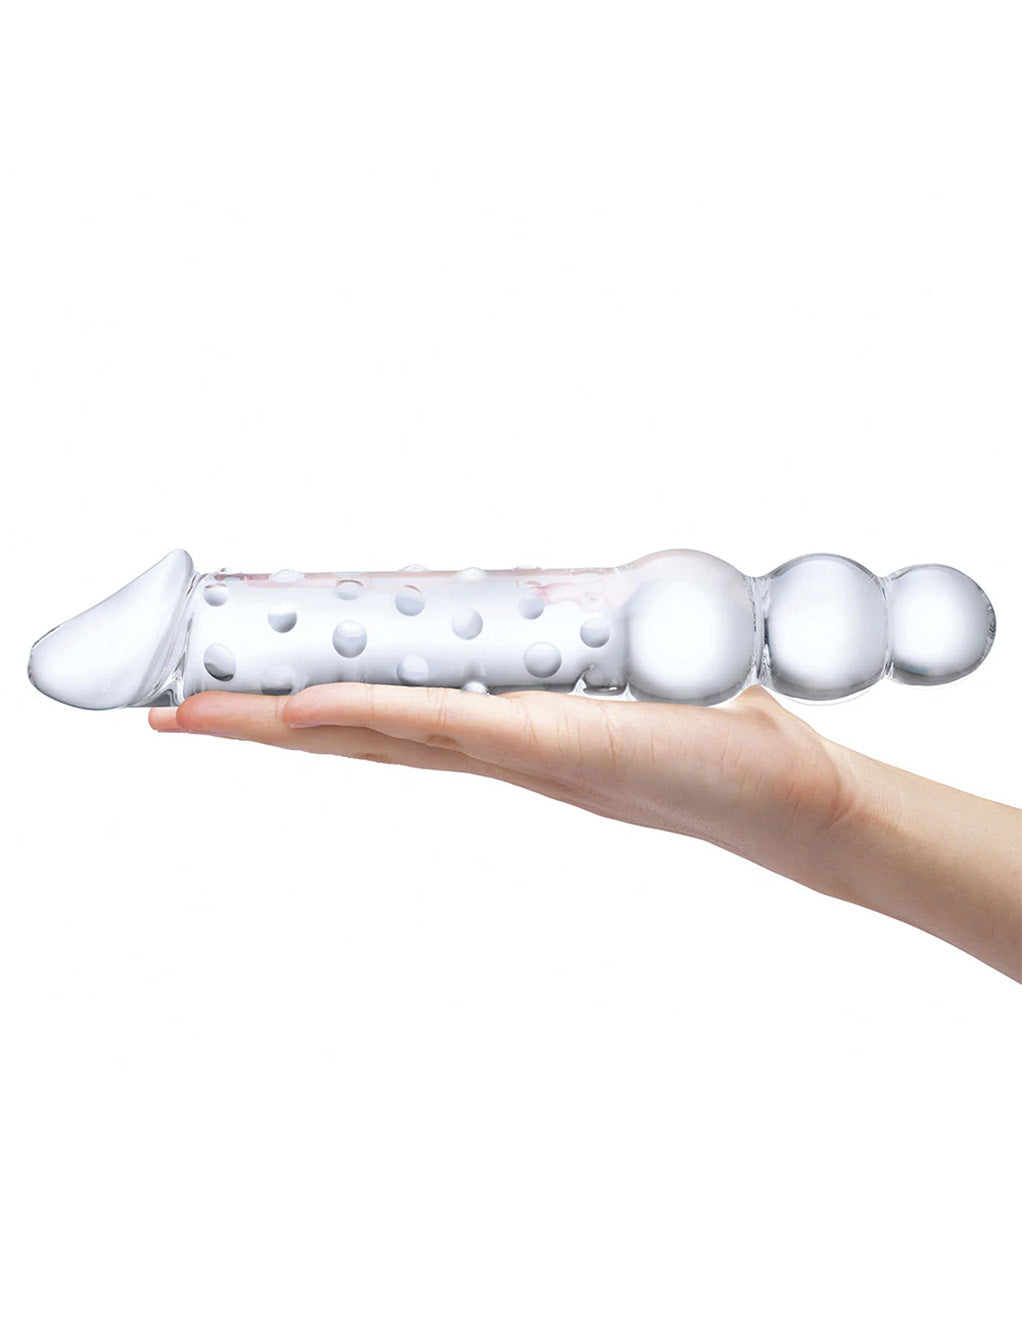 Glas 12" Double Ended Dildo w/ Anal Beads- On Hand